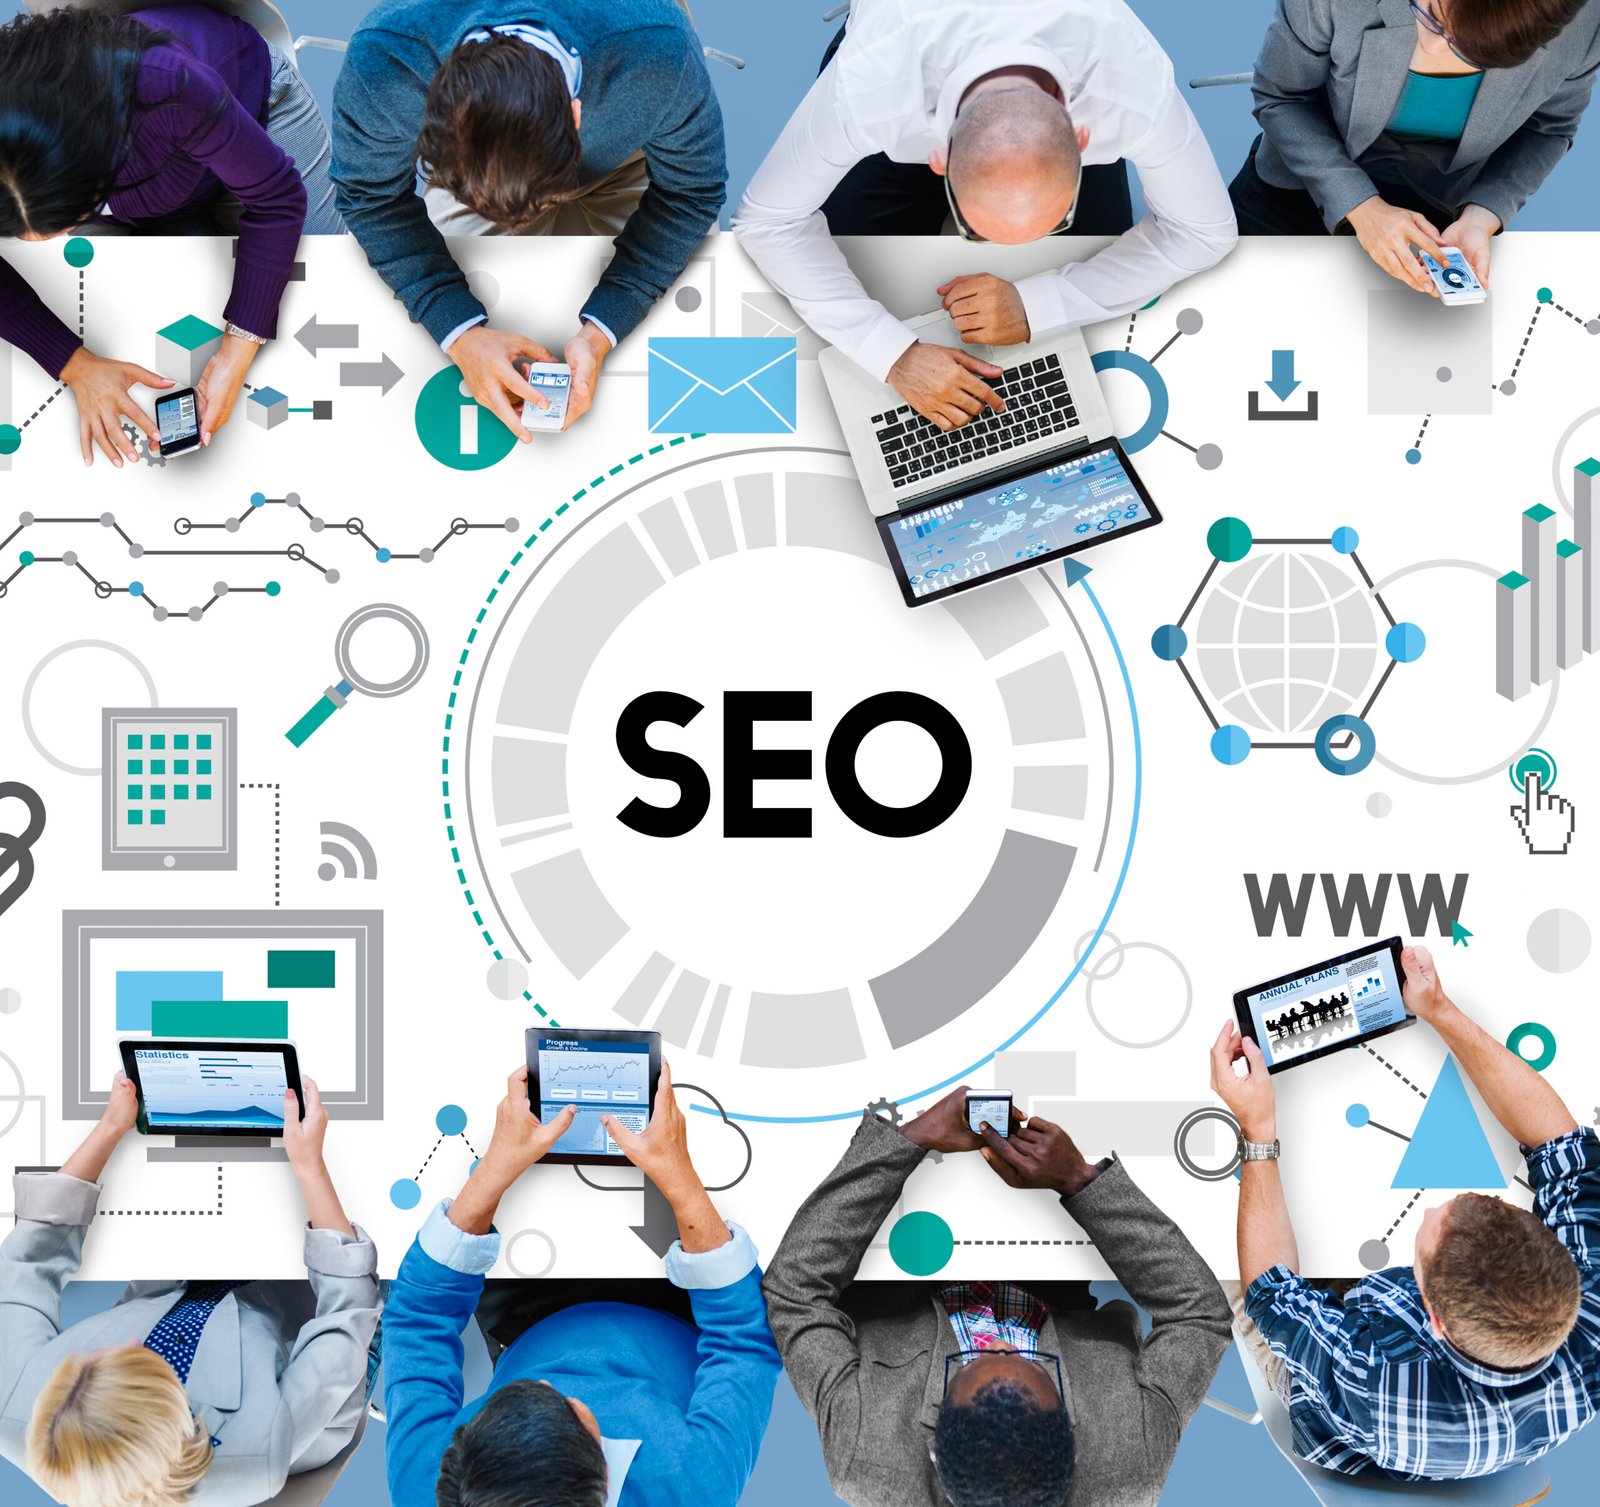 You are currently viewing Search Engine Optimization (SEO) Best Practices